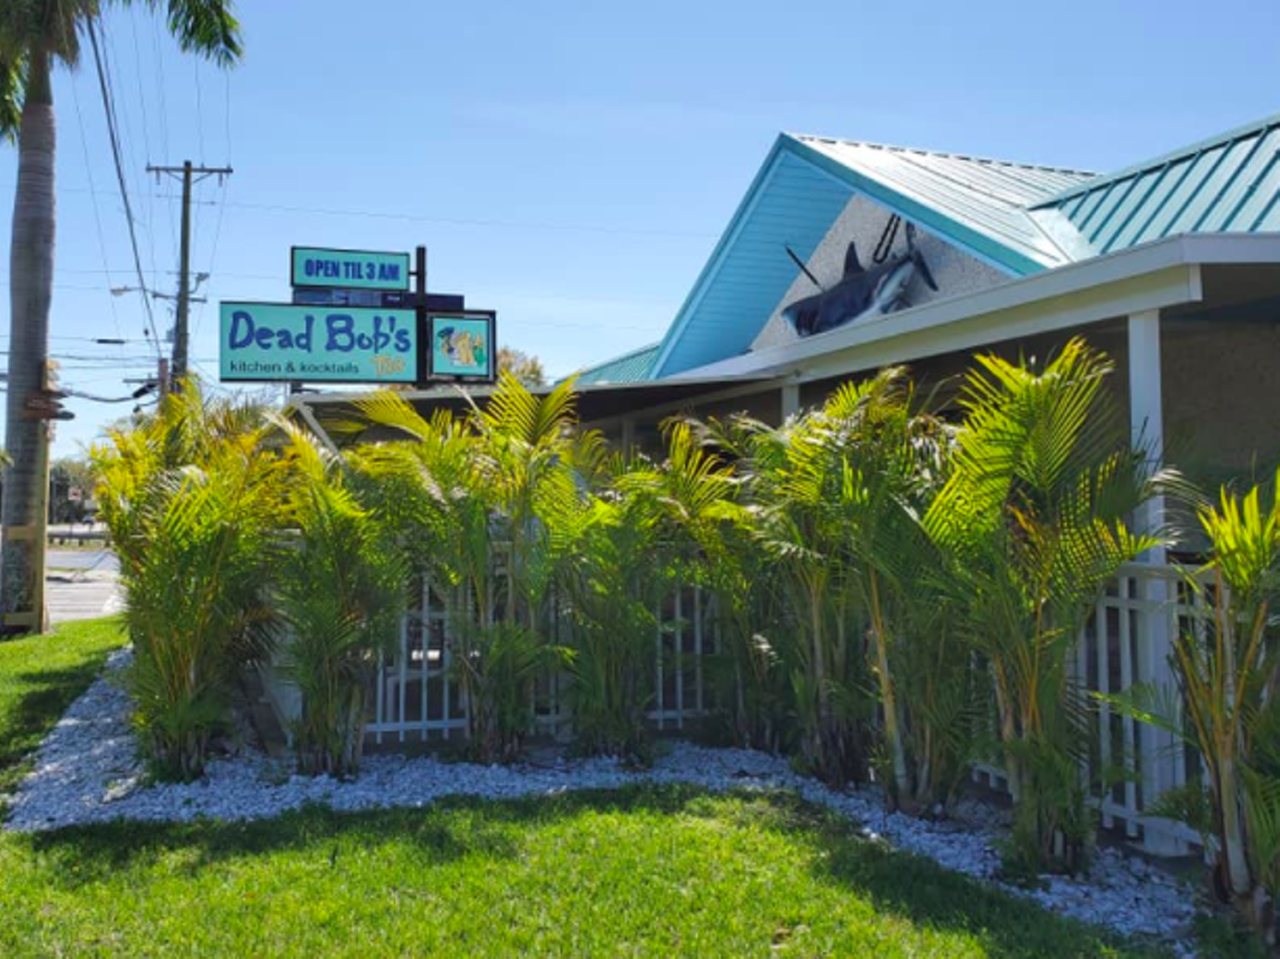 Dead Bob&#146;s Too  
3681 S. West Shore Blvd., Tampa
The iconic St. Pete dive bar expanded across the bridge. Bob's Too is sticking with the tradition of staying open until 3 a.m. for the night owls or those who need to soak up some alcohol before they Uber home.  
Photo via Dead Bob&#146;s Too/Facebook